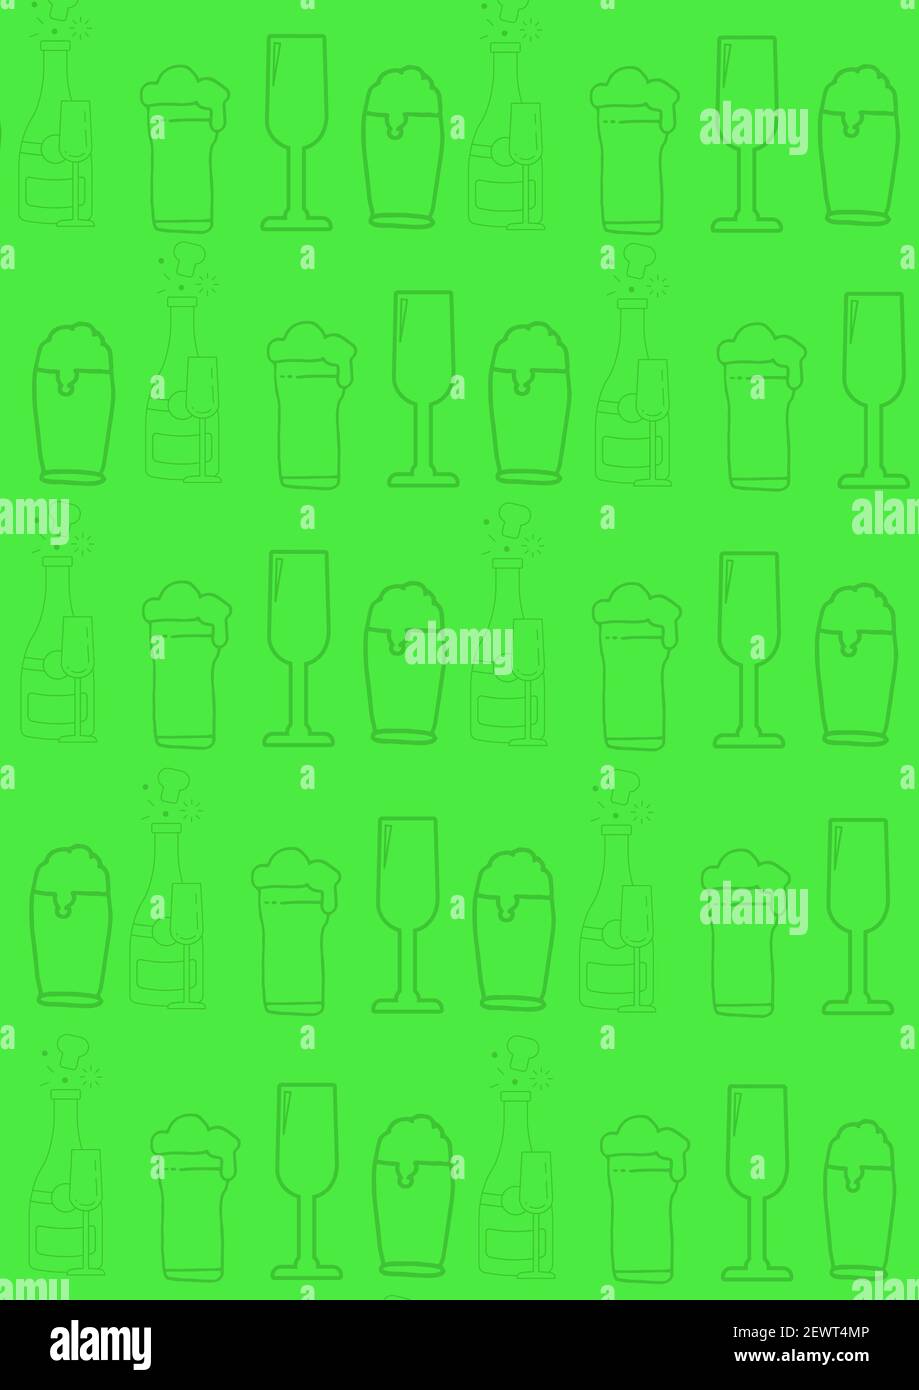 Multiple rows of drink glasses pattern on green background Stock Photo